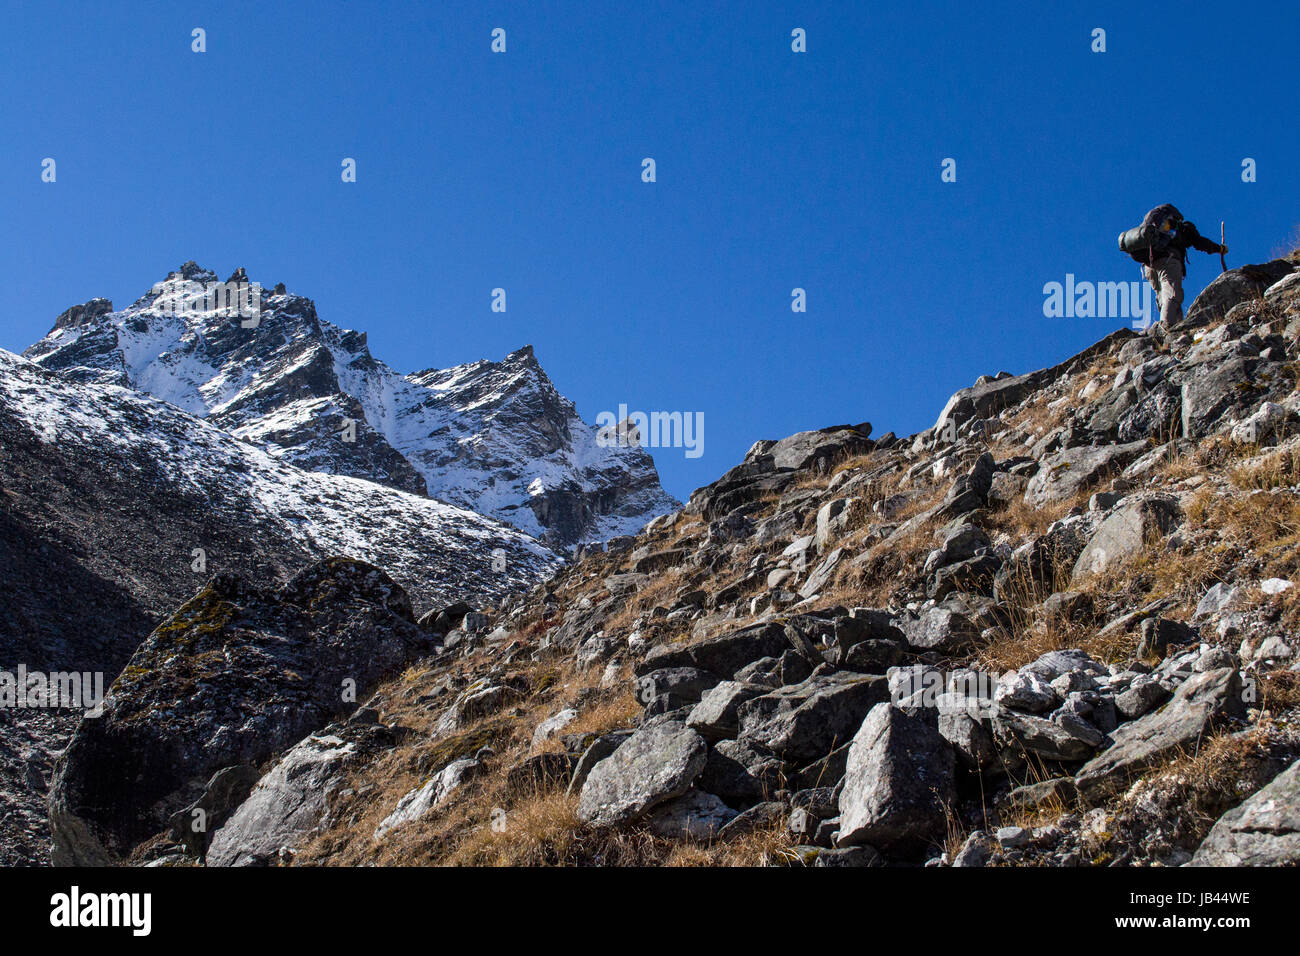 Langtang National Park. Il Nepal. Escursionismo sotto l'Himalaya Foto Stock